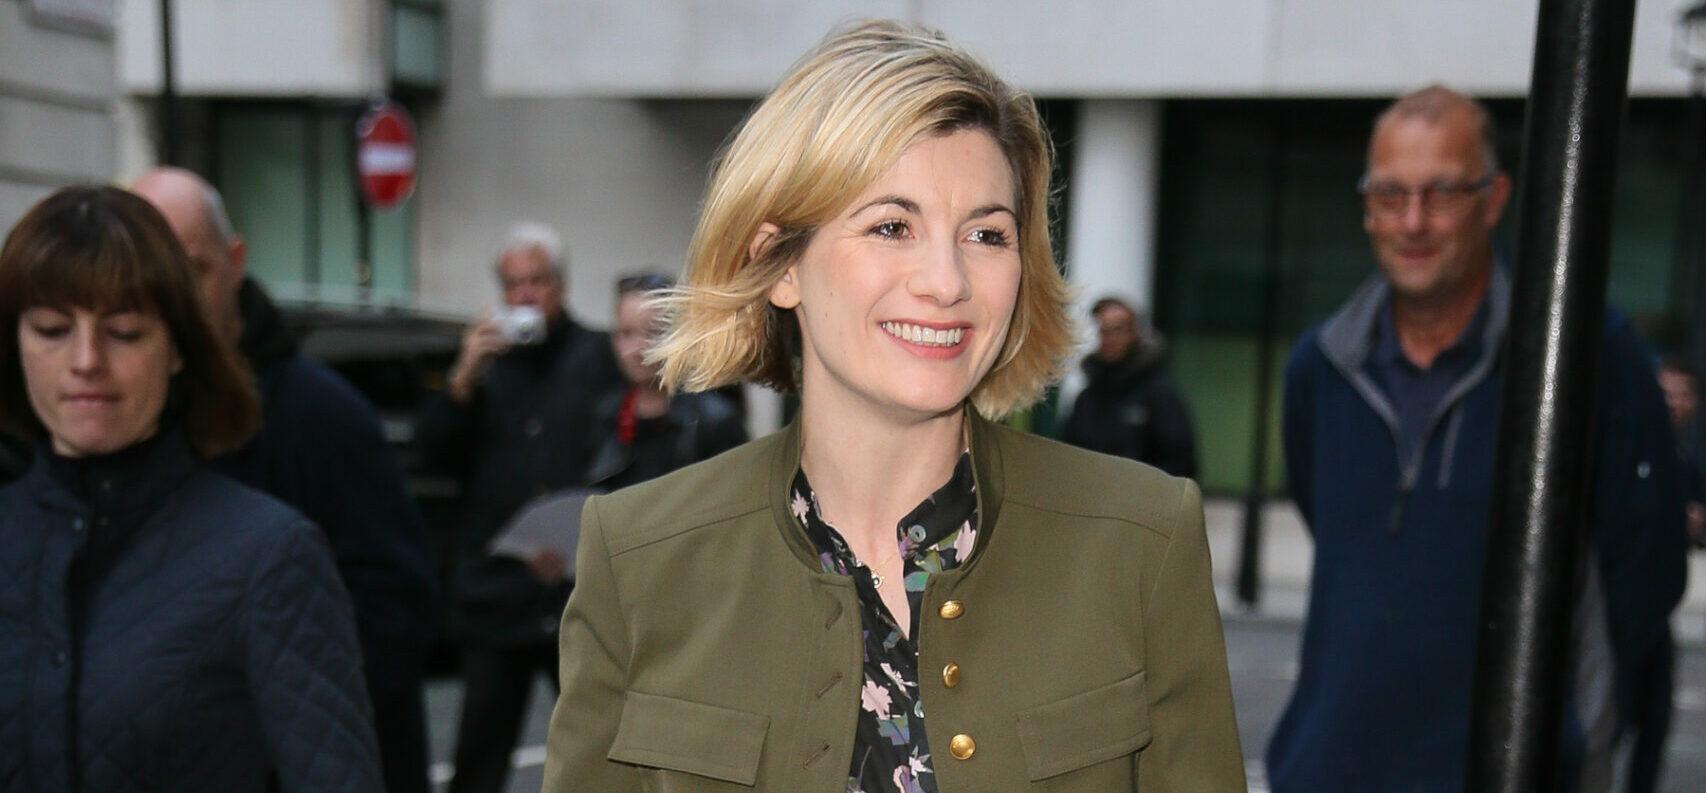 Doctor Who Jodie Whittaker arriving at BBC Radio Two Studios to promote the new series - London